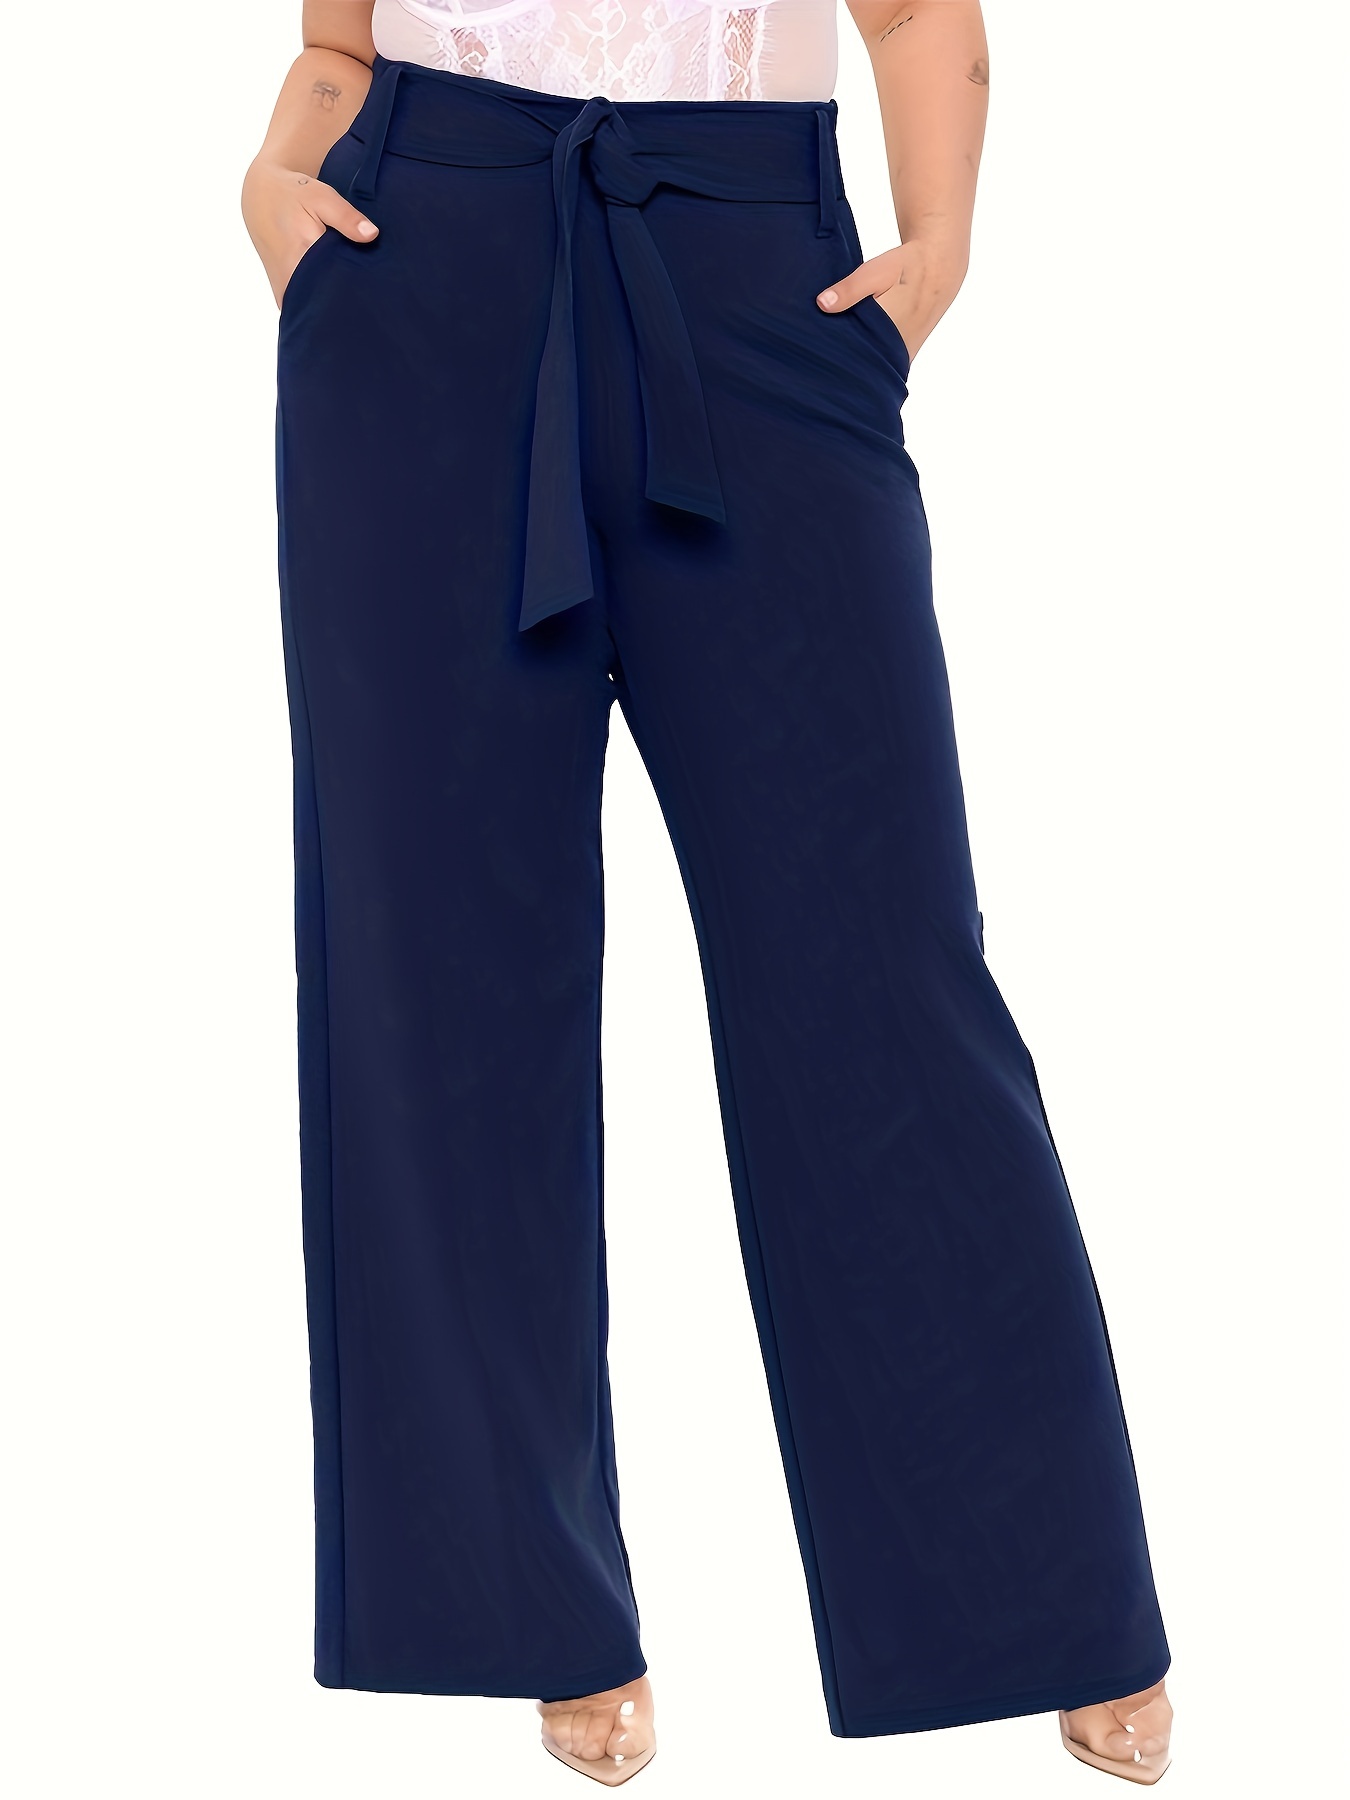 Plus Size Basic Suit Pants, Women's Plus Solid Button Fly High Rise Medium  Stretch Workwear Tailored Pants